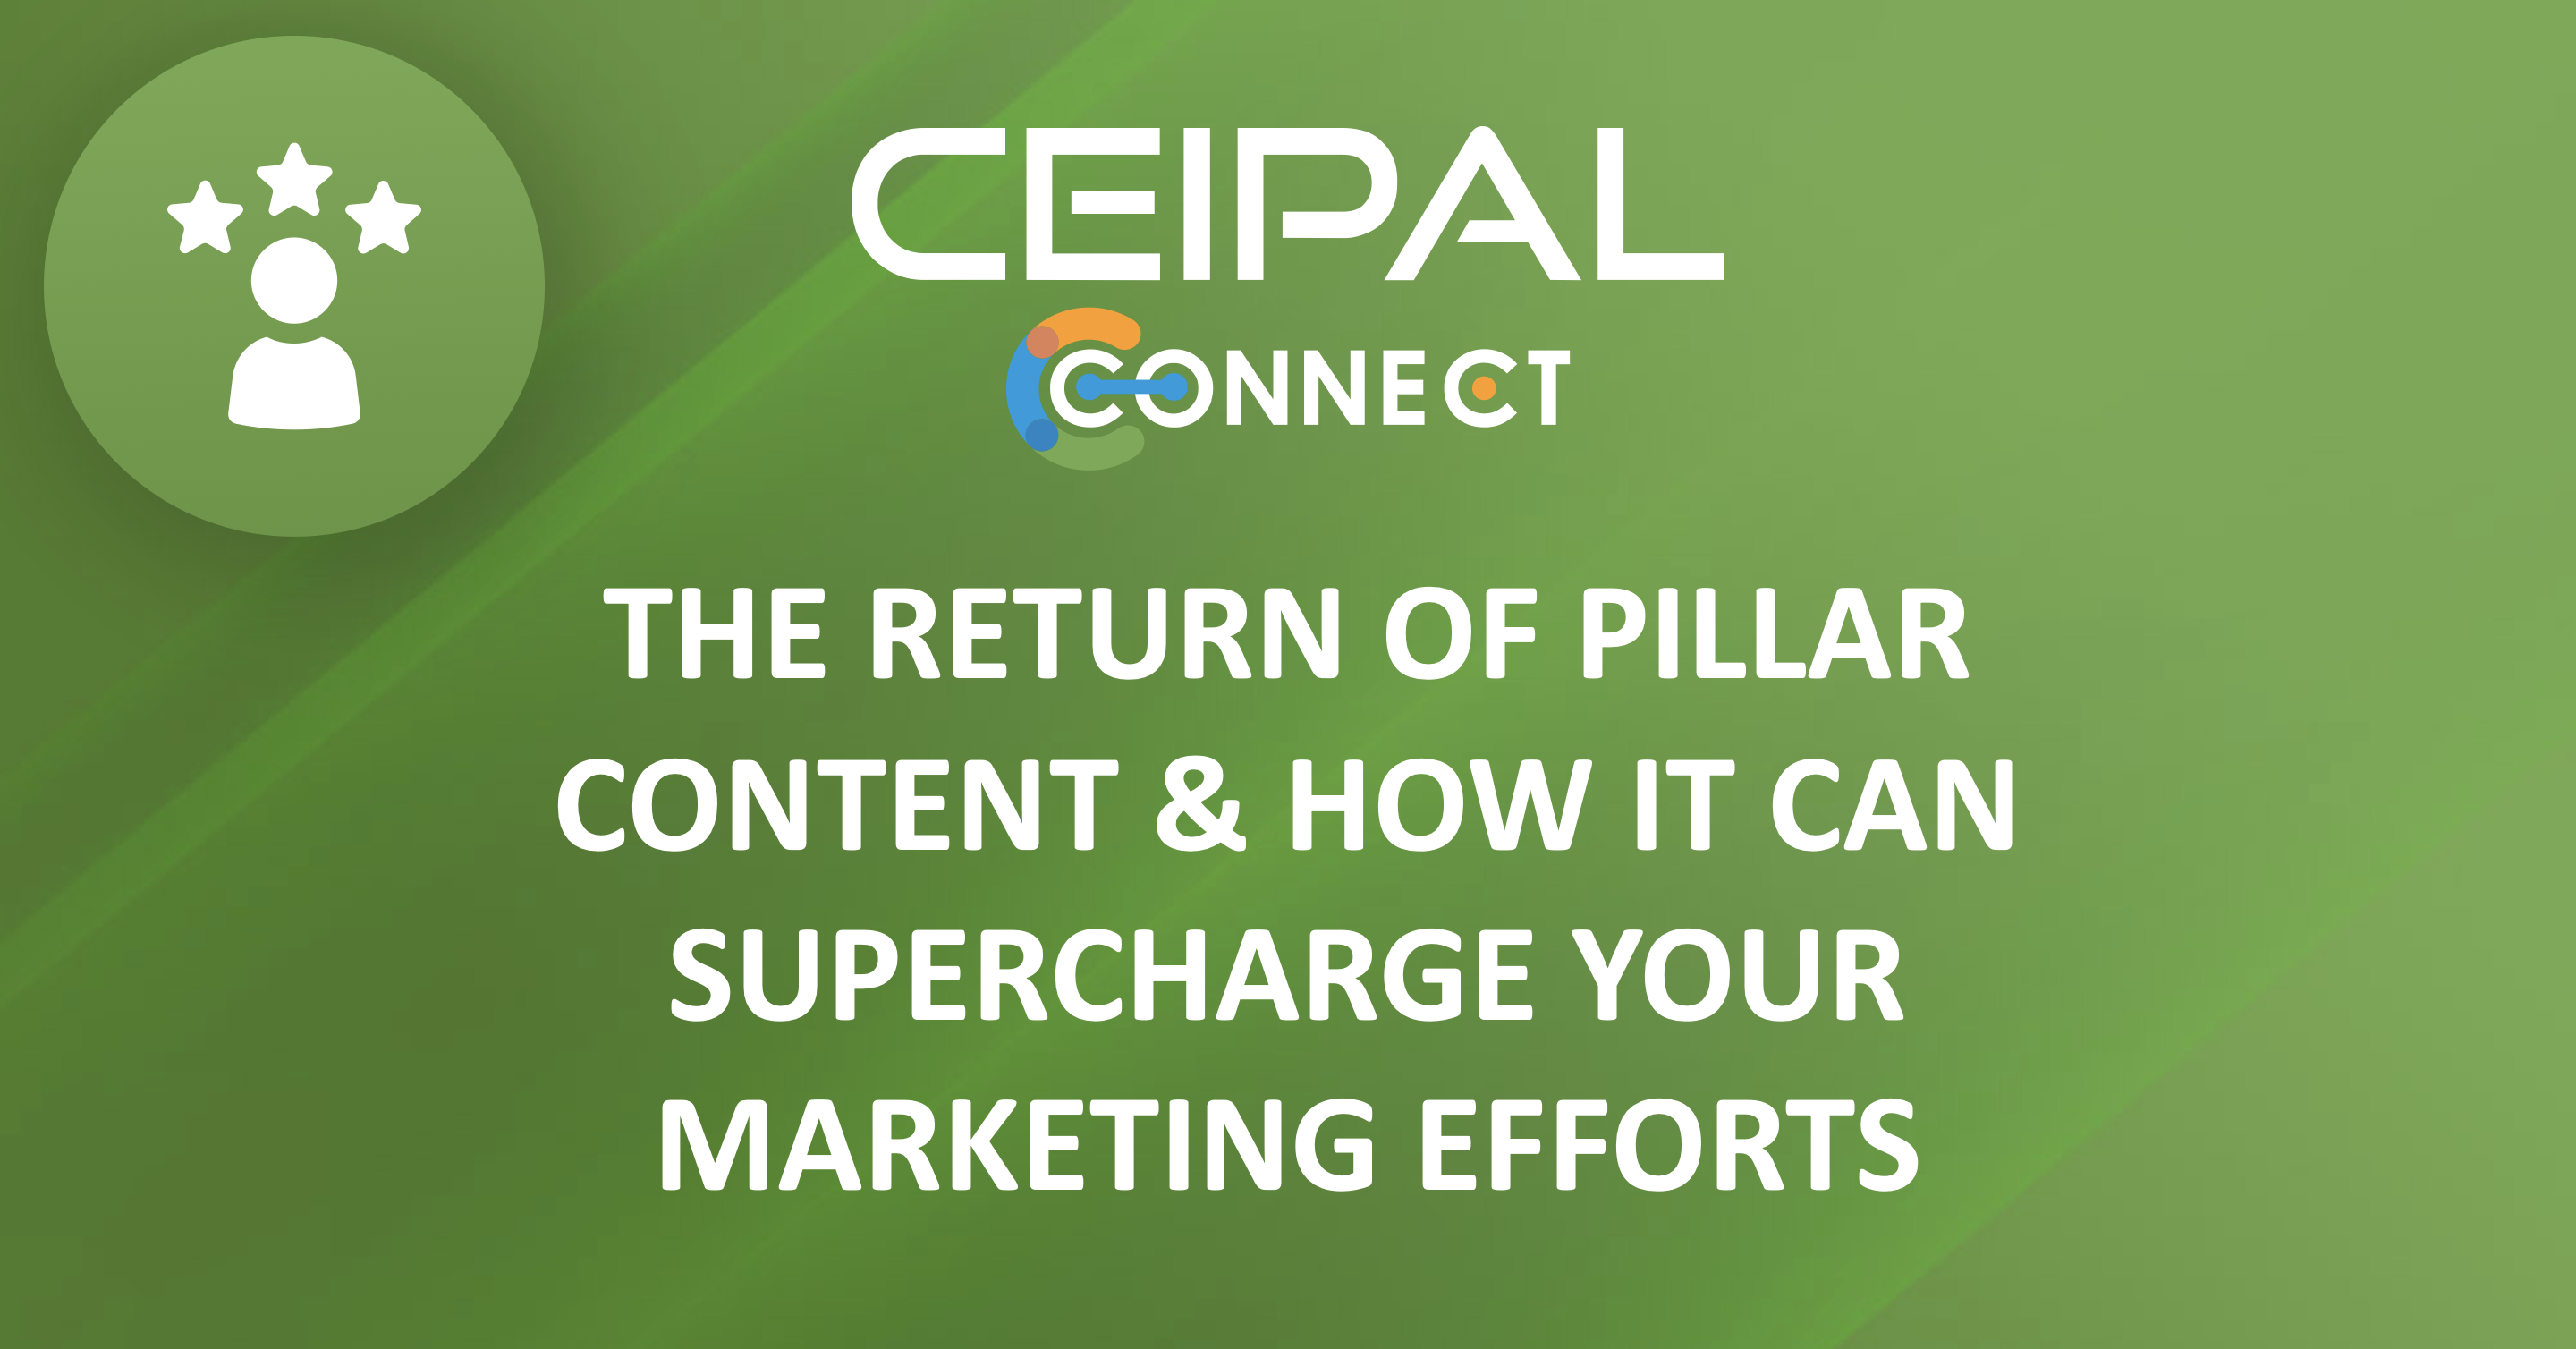 The Return of Pillar Content & How it Can Supercharge Your Marketing Efforts